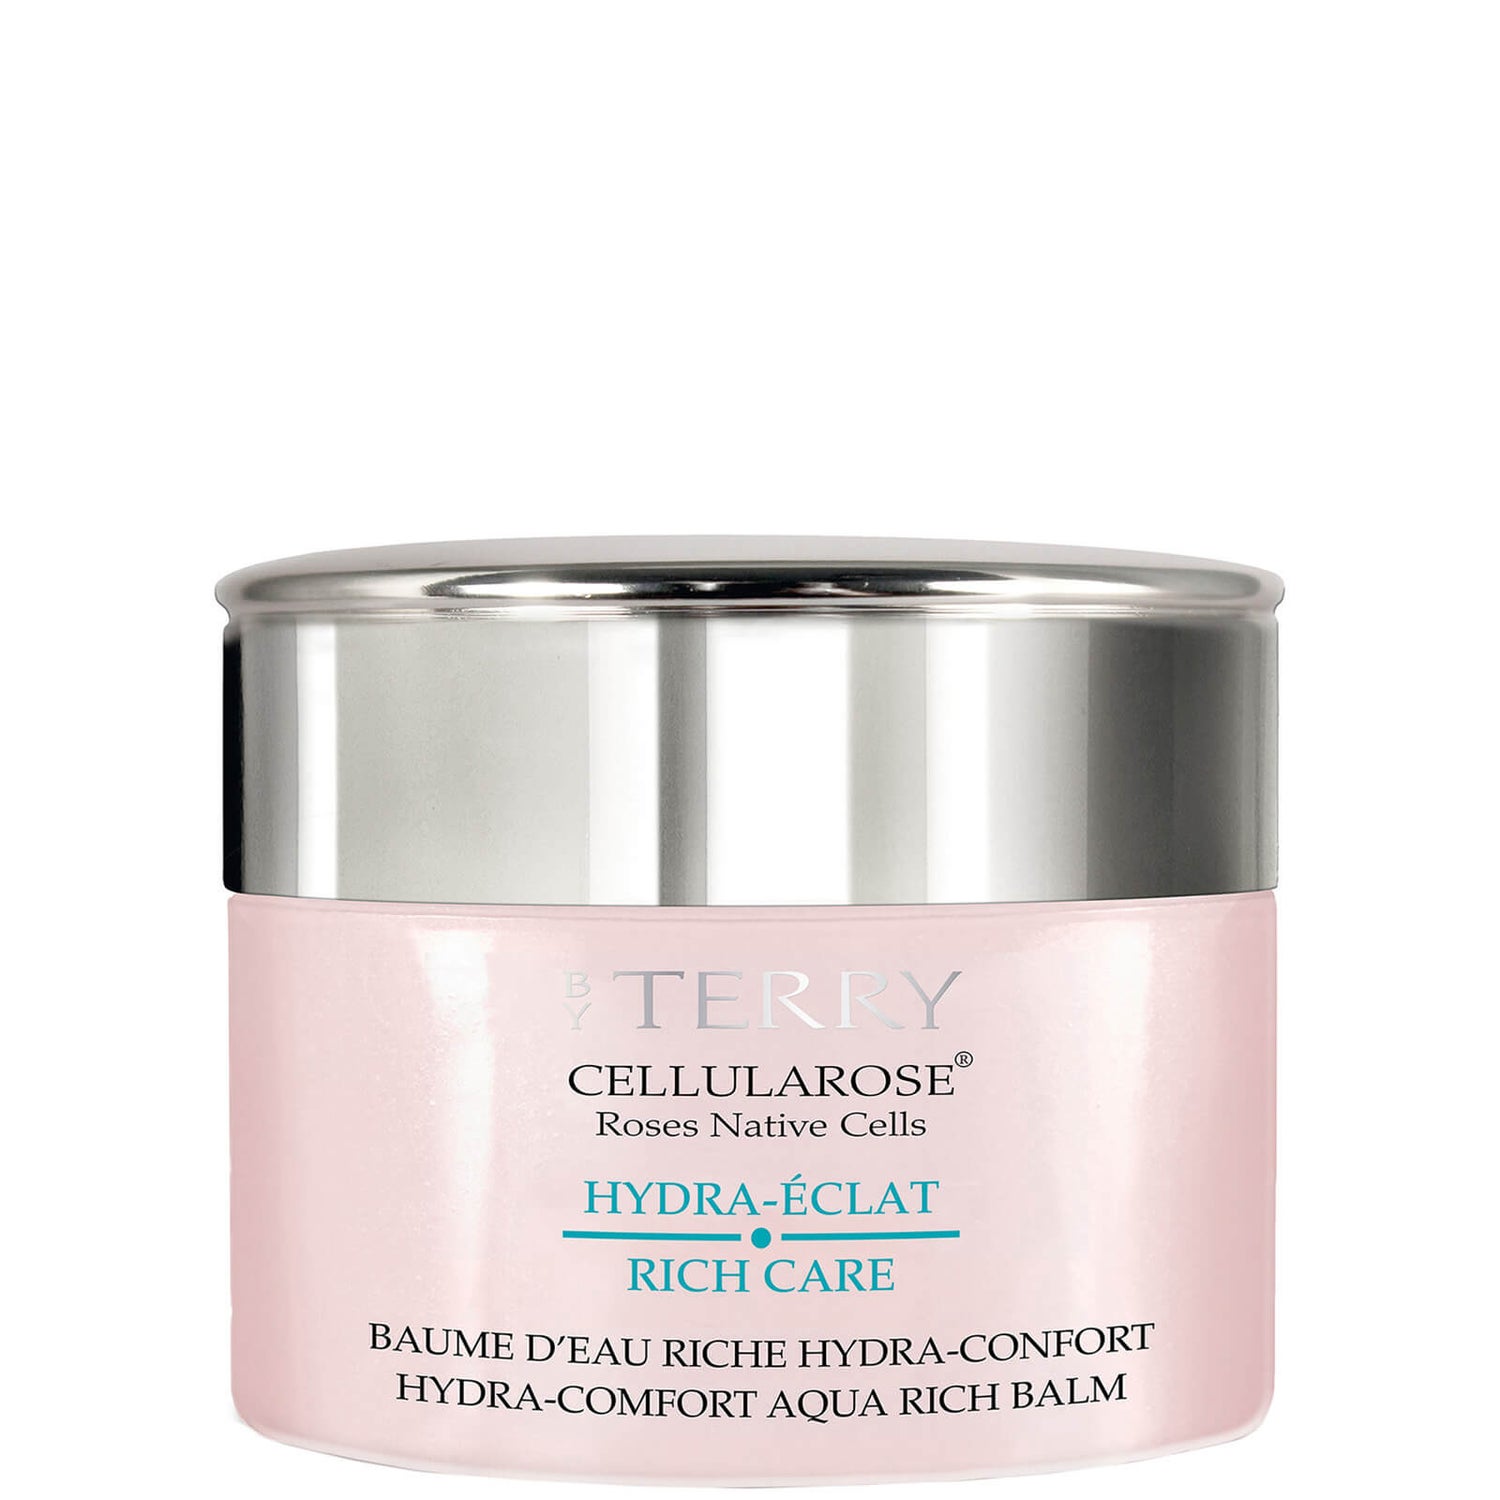 By Terry Cellularose Hydra-Eclat Rich Care Balm (By Terry セルラローズ ハイドラエクラット リッチ ケア バーム) 30g